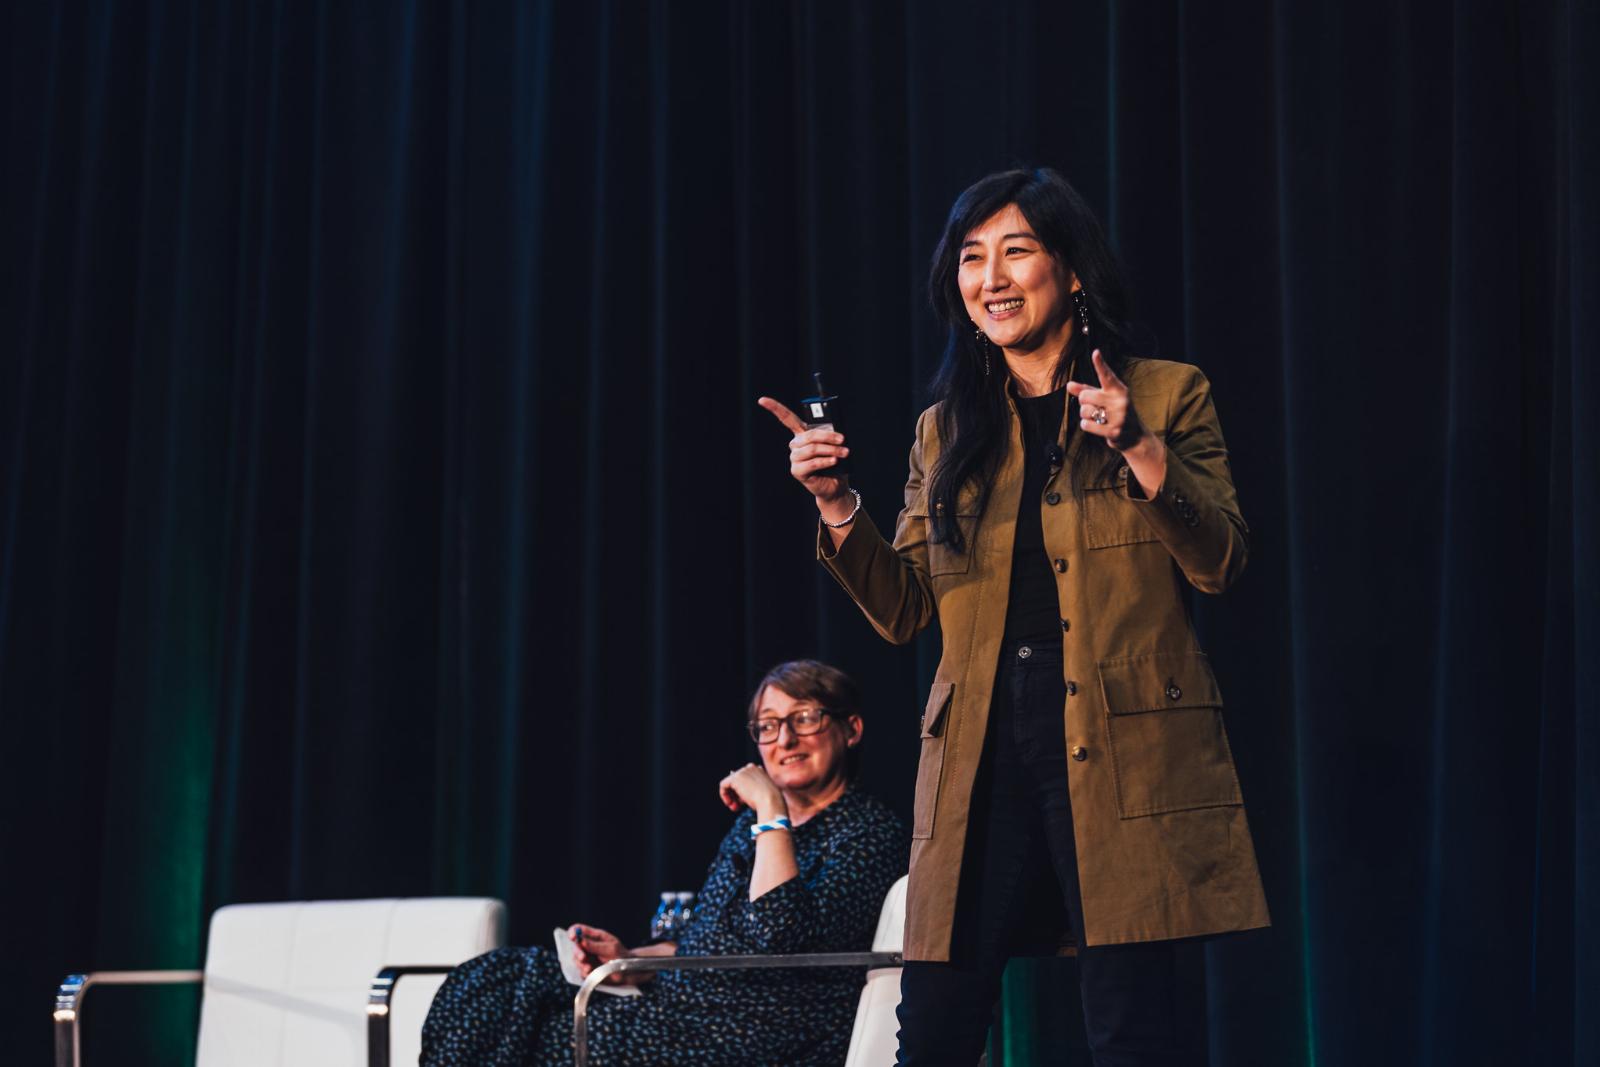 Sequoia’s Jess Lee explains how early-stage startups can identify product-market fit